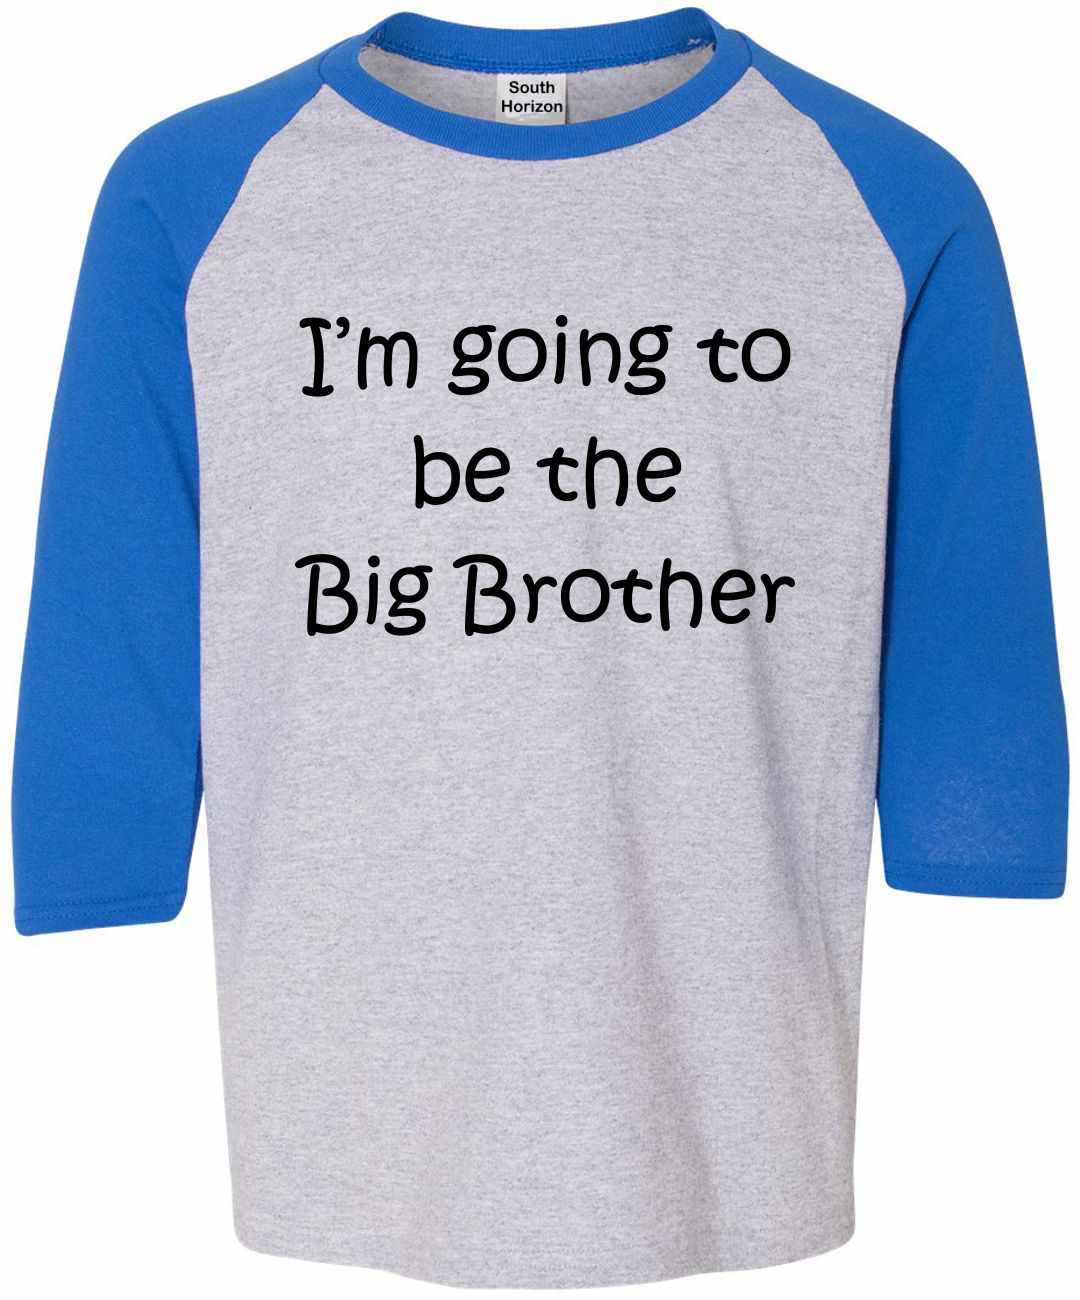 I'M GOING TO BE THE BIG BROTHER on Youth Baseball Shirt